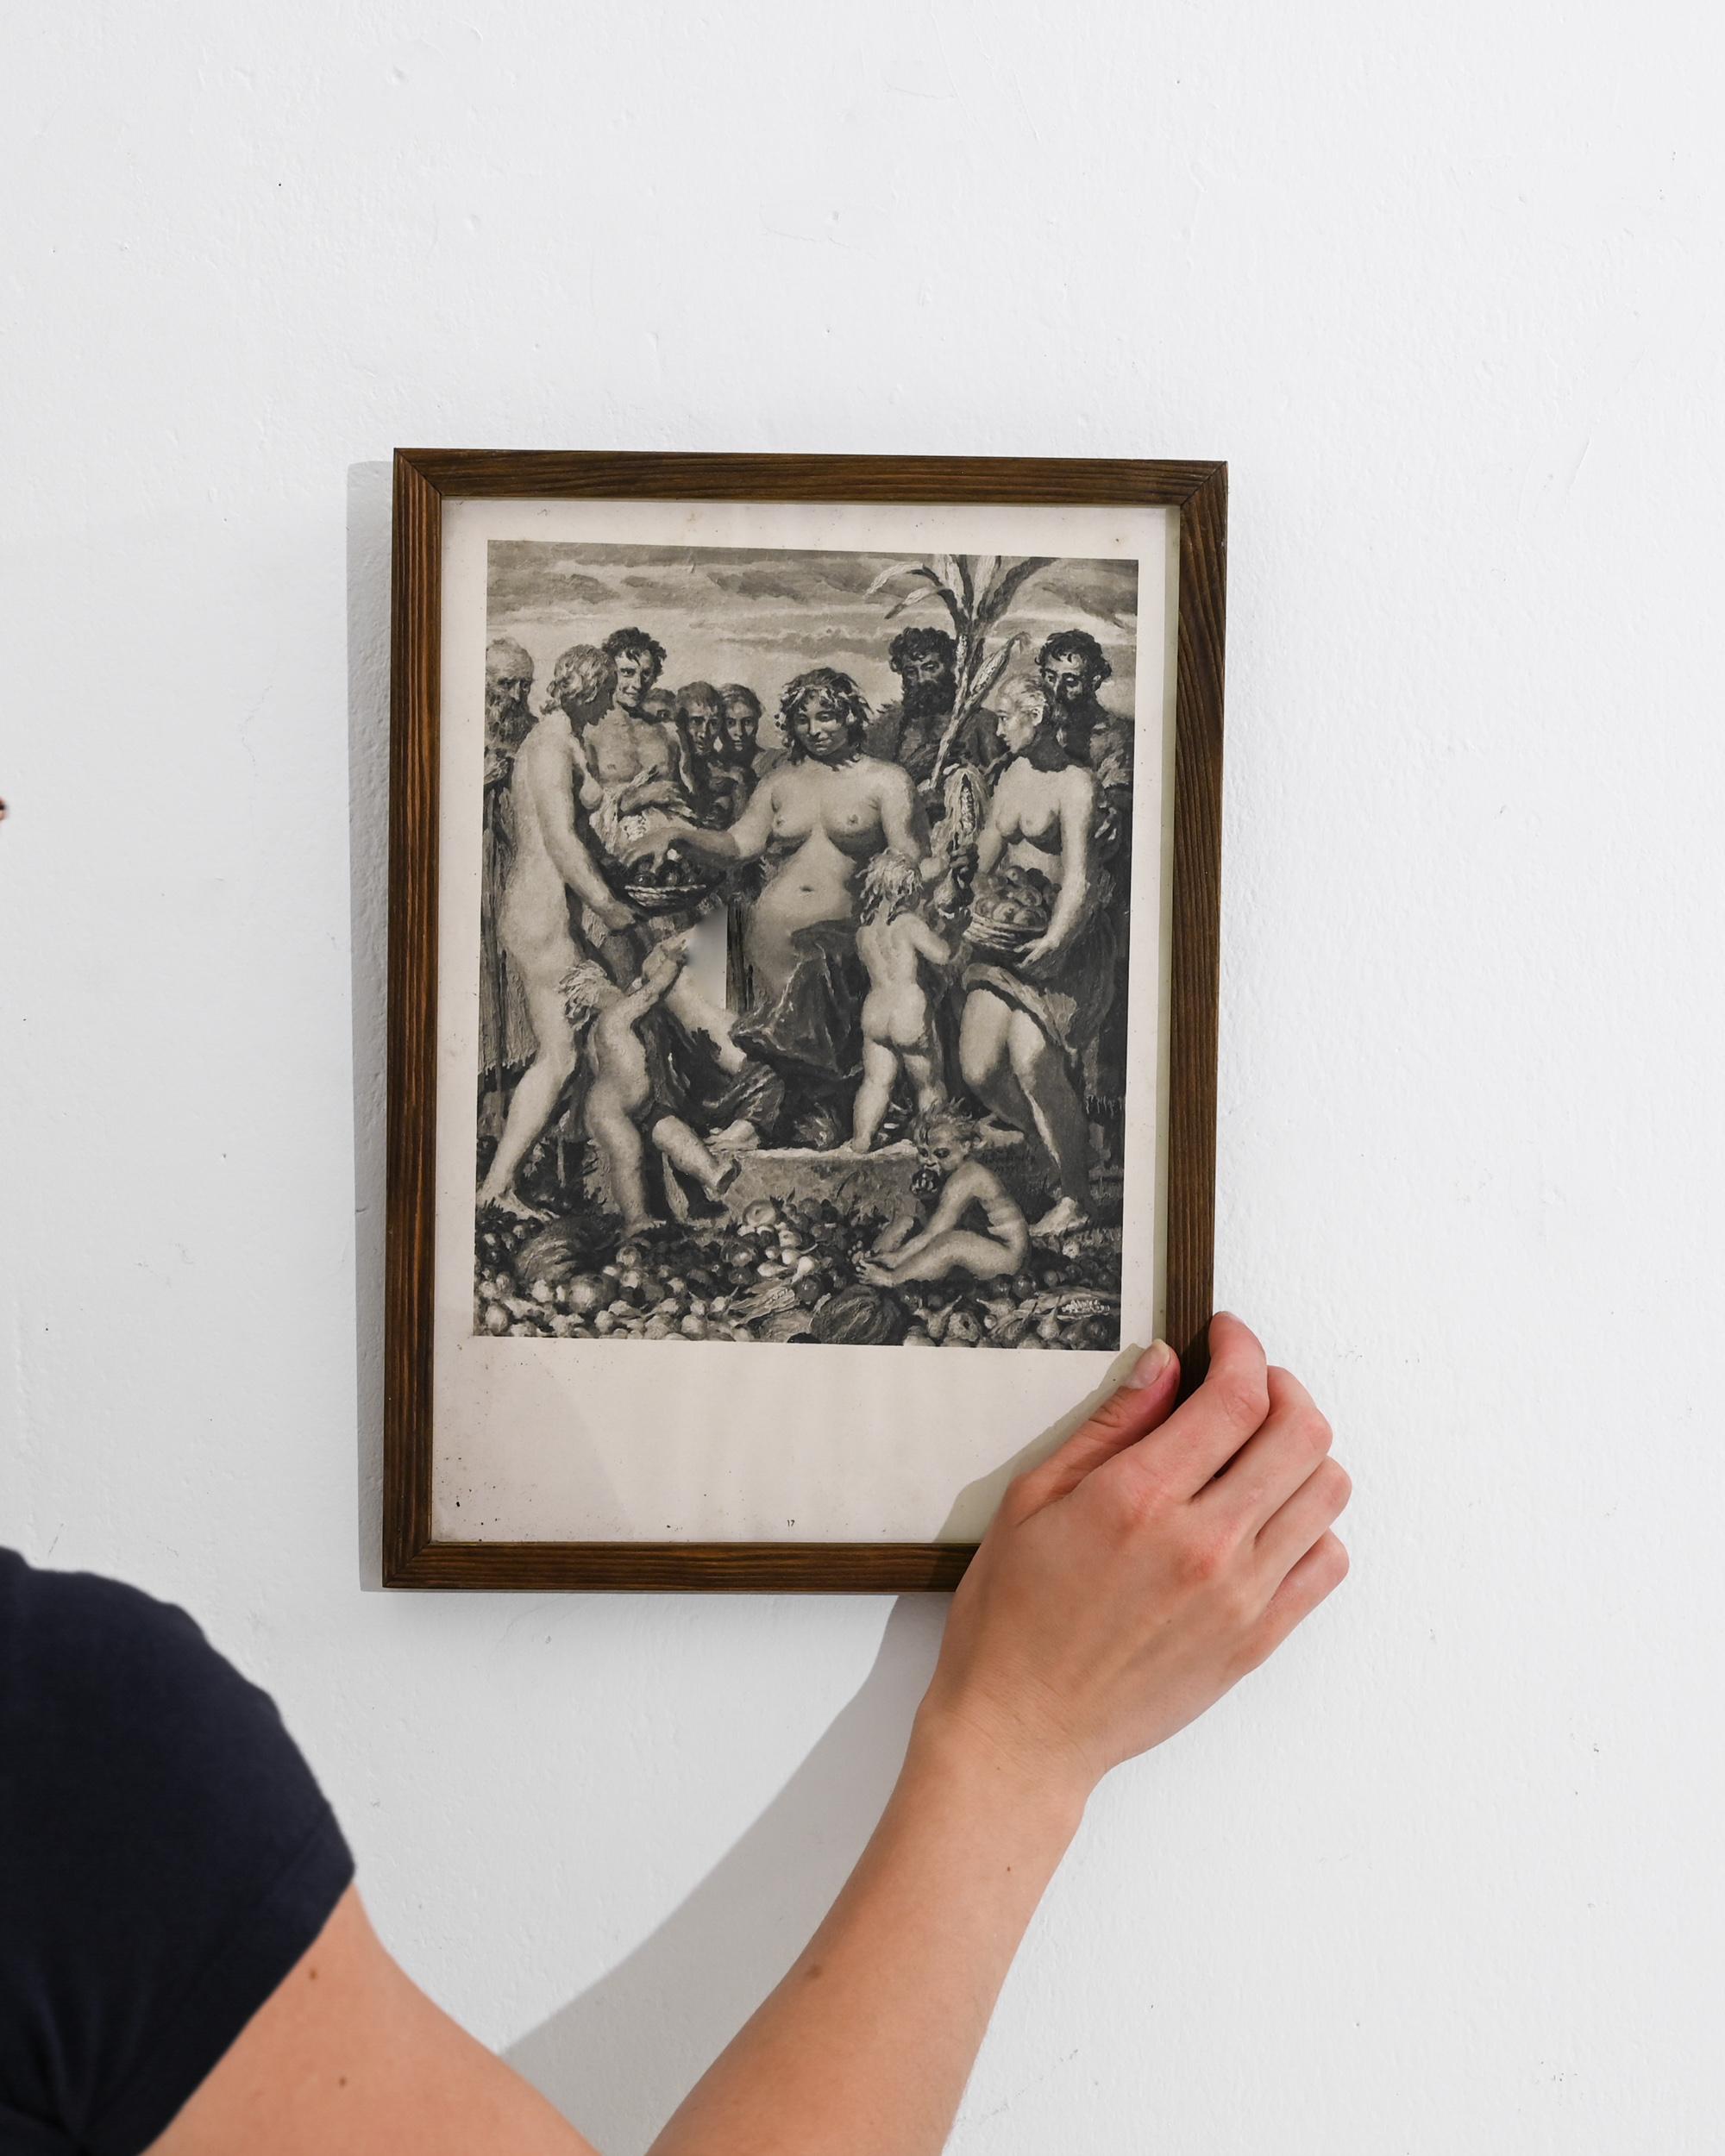 This striking piece is a 20th-century Czech print, capturing the classical essence of mythological storytelling through its detailed engraving. The scene, reminiscent of an ancient world, depicts figures that evoke the grandeur and drama of